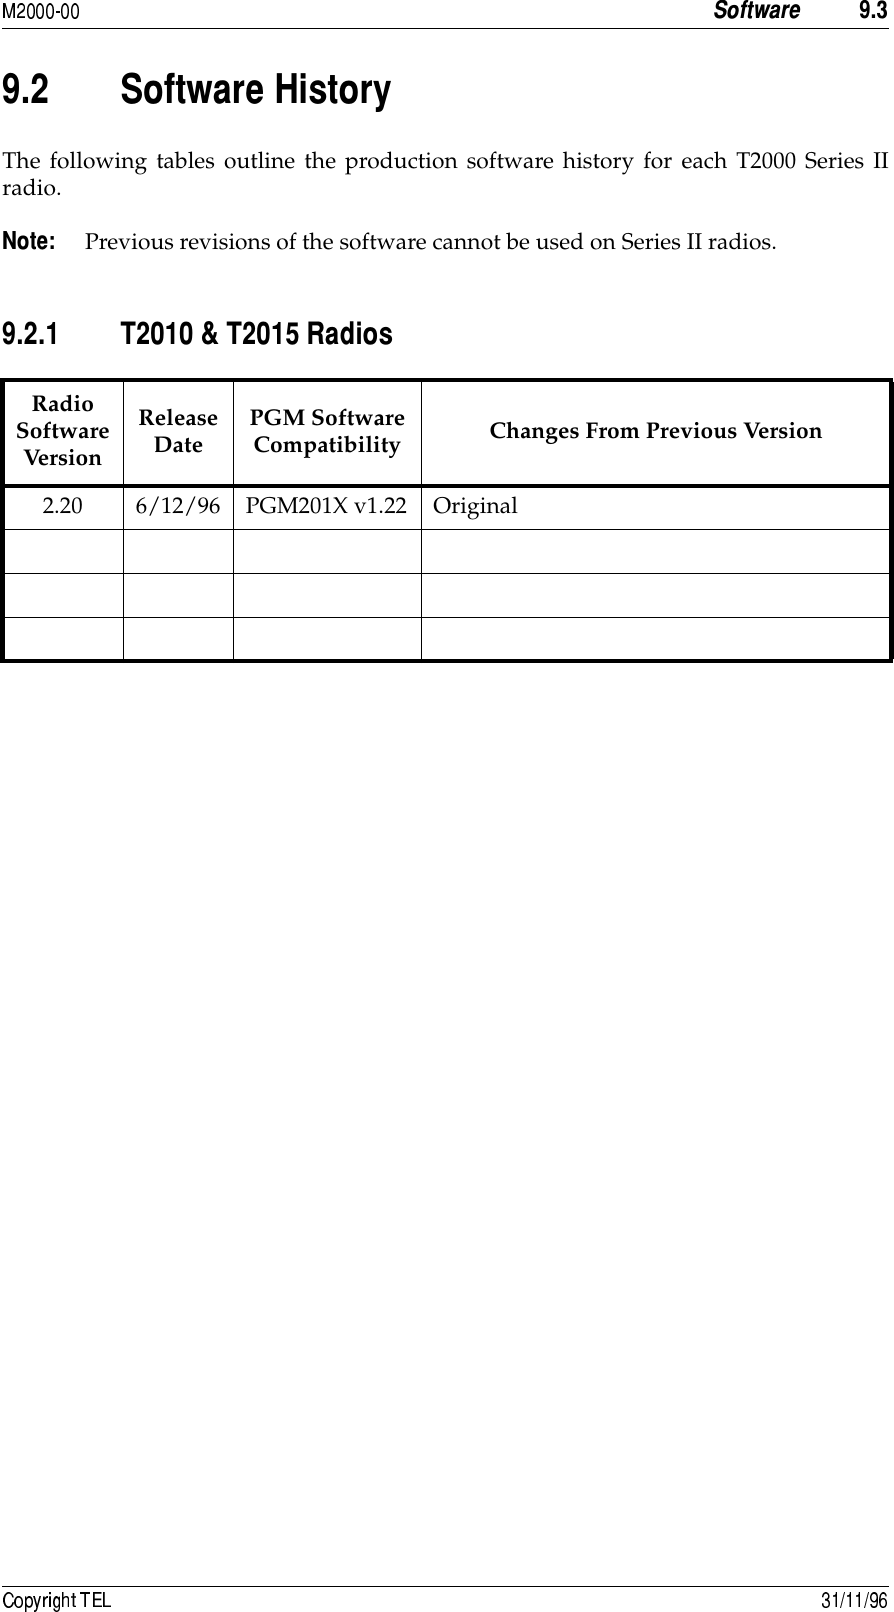 3 -- &gt;The following tables outline the production software history for each T2000 Series IIradio.:&quot; Previous revisions of the software cannot be used on Series II radios.- &lt; )(RadioSoftwareVersionReleaseDate PGM SoftwareCompatibility Changes From Previous Version2.20 6/12/96 PGM201X v1.22 Original